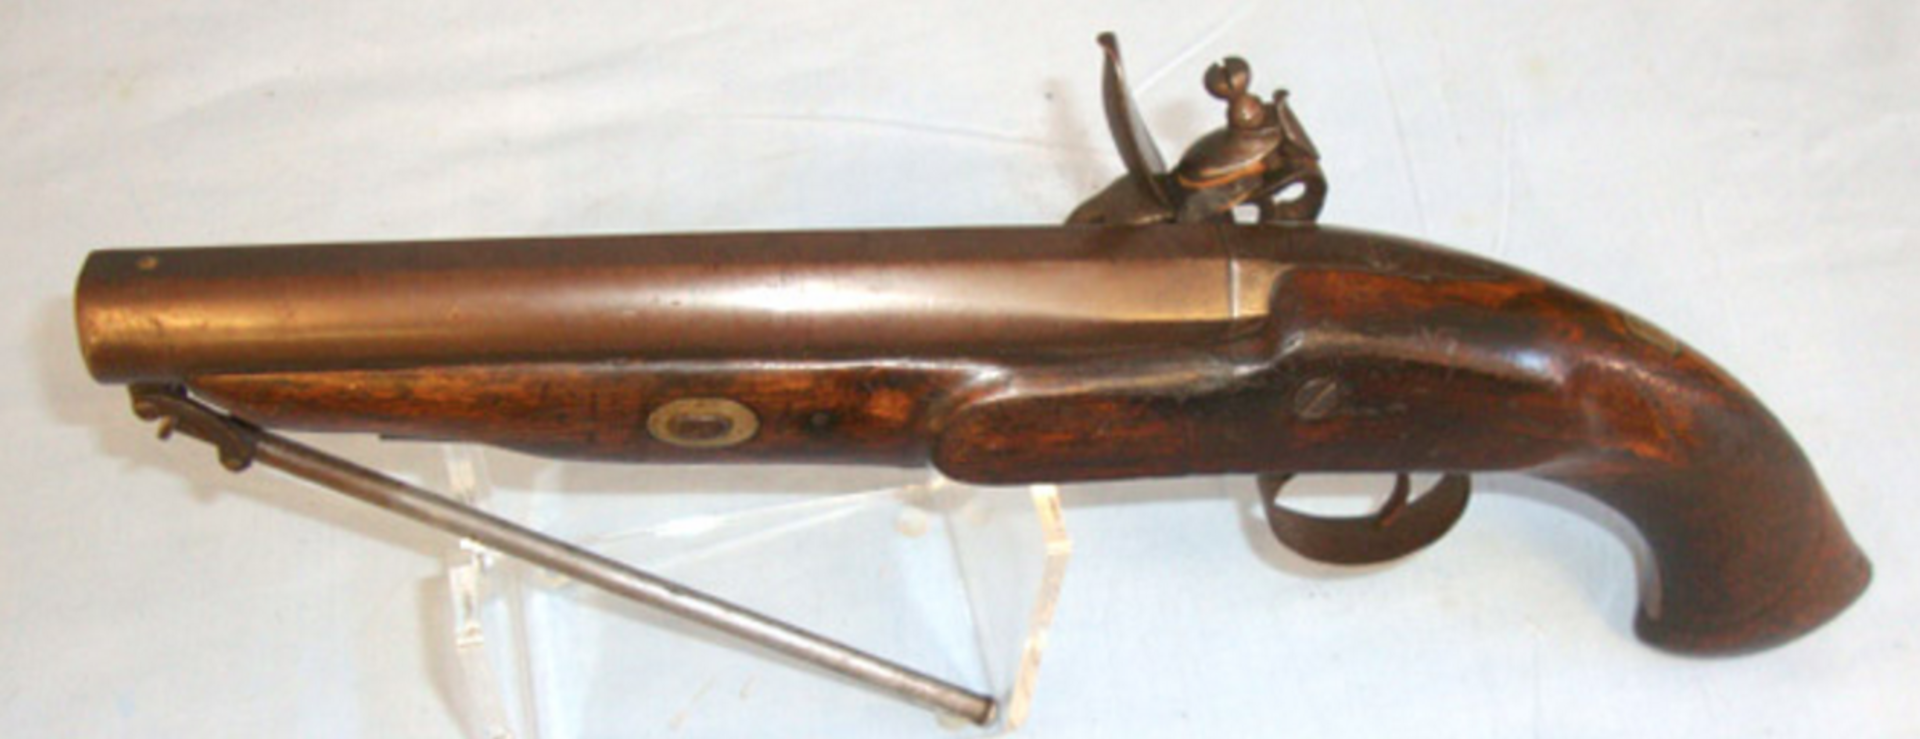 RARE, C1815 .750 Musket Bore, Flintlock Holster Pistol By Lacy & Co London With ‘Fish Tail’ Grip - Image 3 of 3